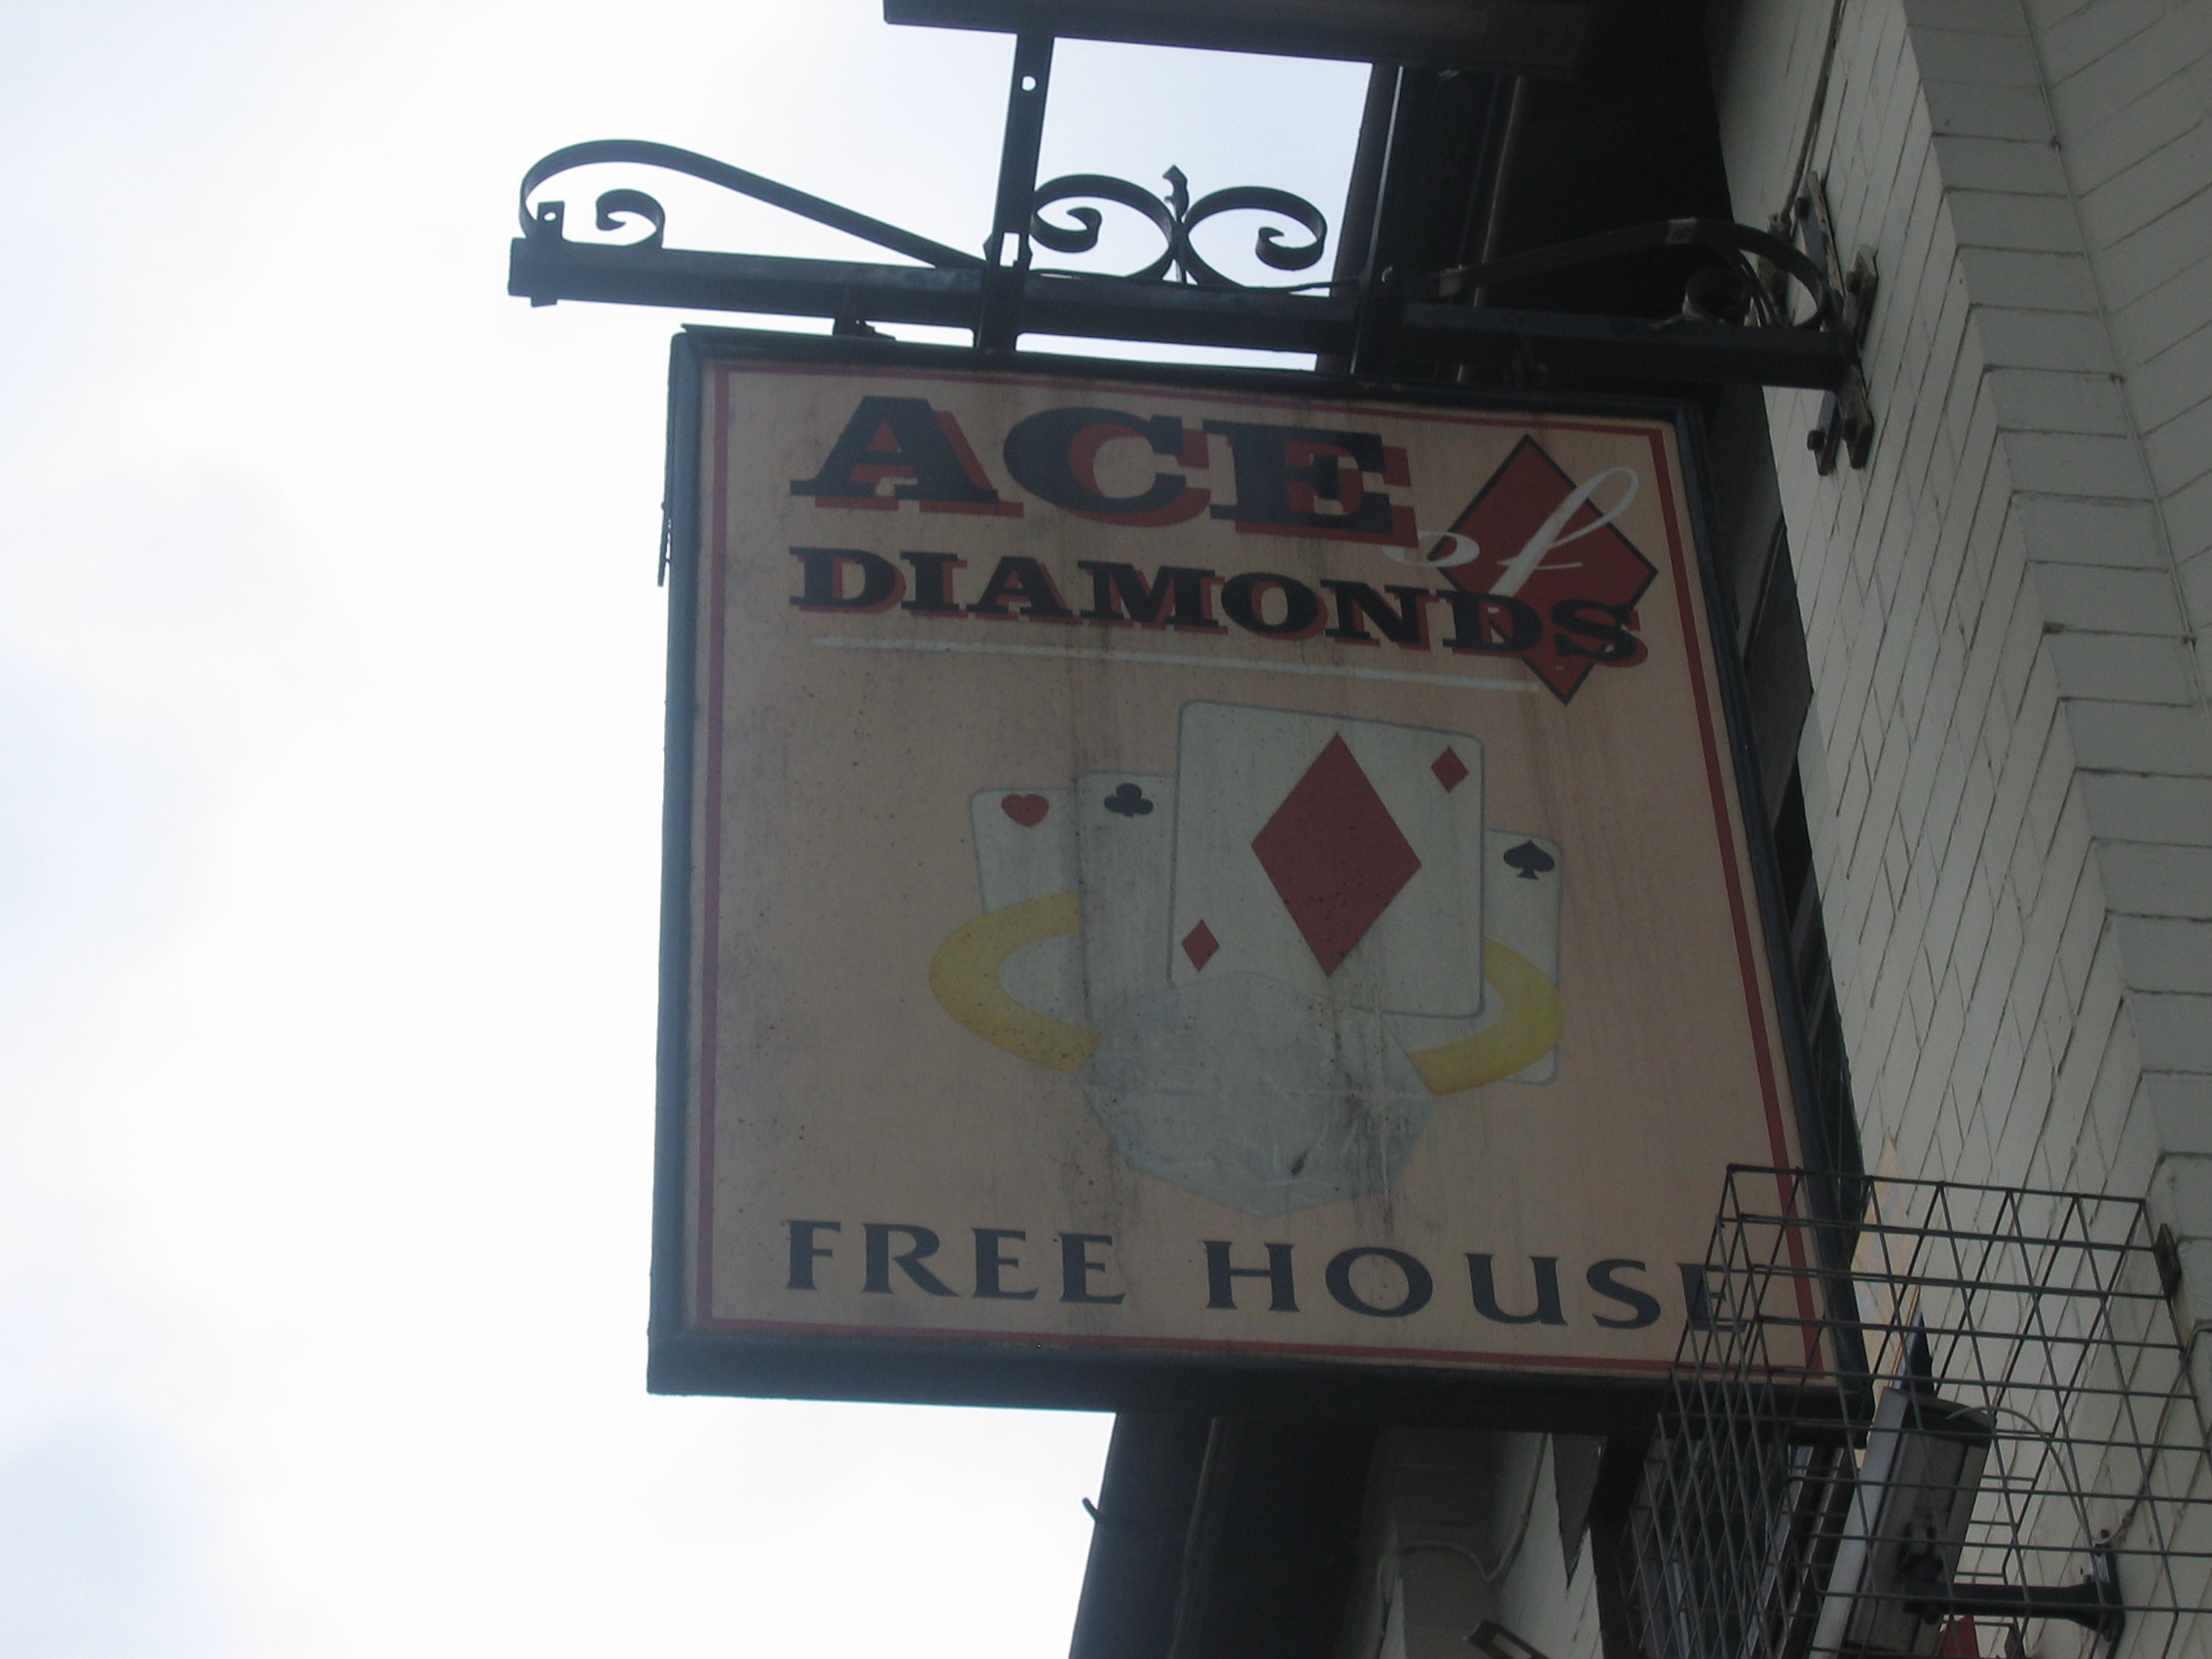 Photo taken by me pub sign for the Ace of Diamonds in Miles Platting, North Manchester